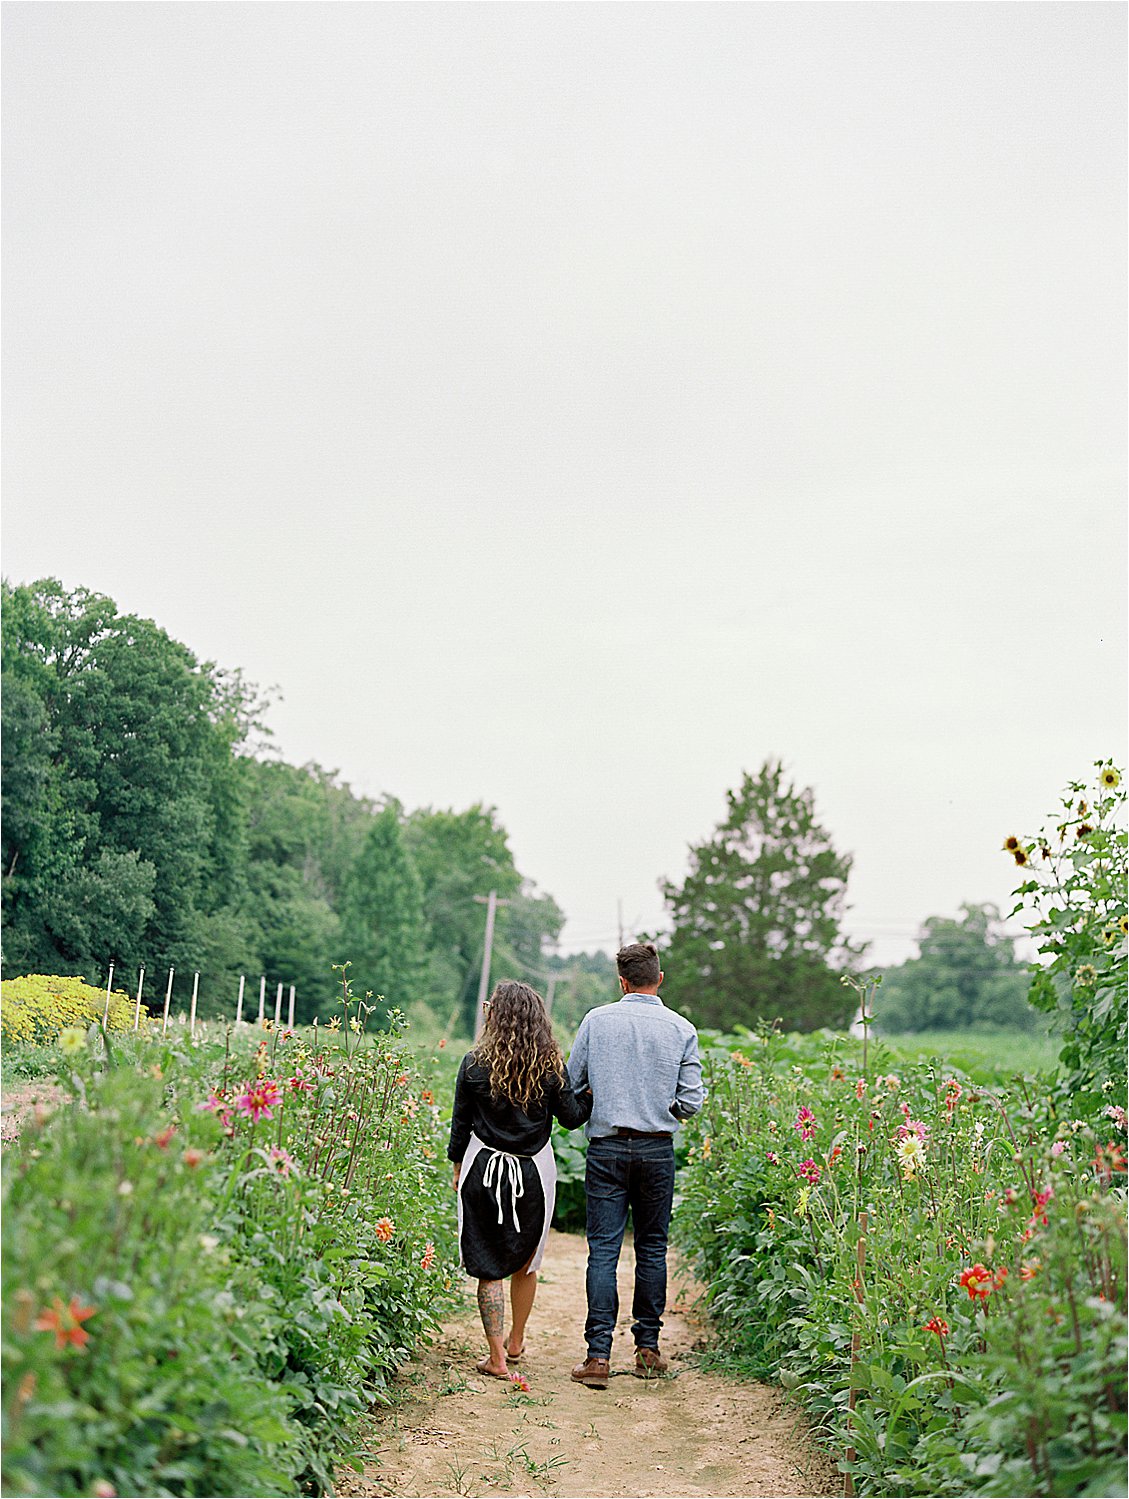 Rainy day at Loblolly Organic Farm, a floral farm just outside of DC by Destination film wedding photographer, Renee Hollingshead. DC, MD, and VA florists and designers